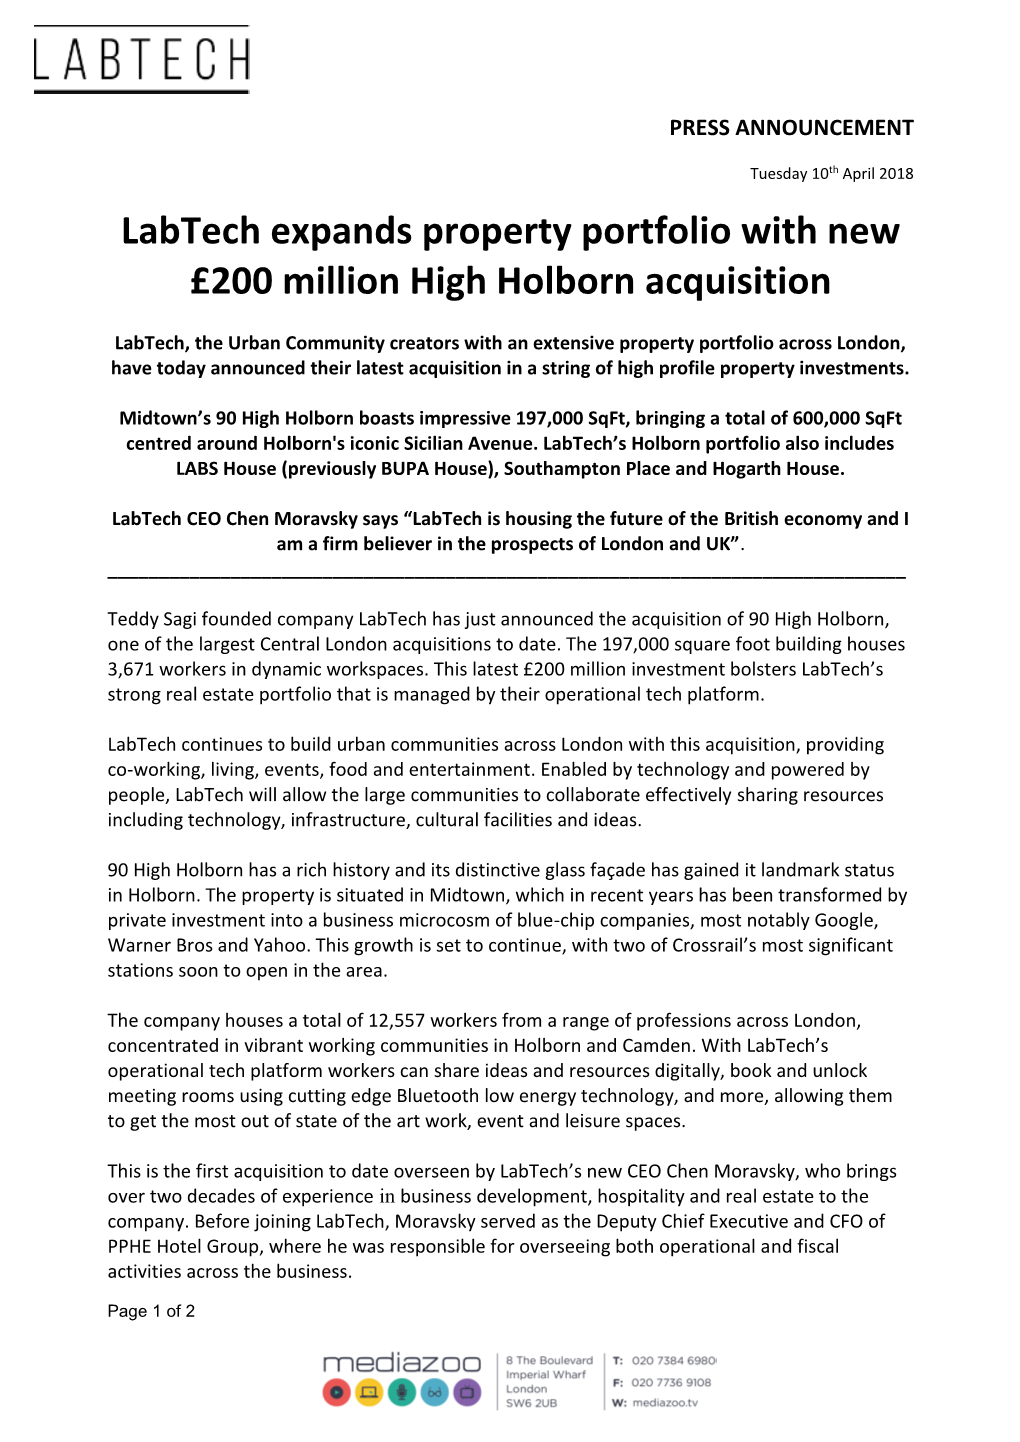 Labtech Expands Property Portfolio with New £200 Million High Holborn Acquisition